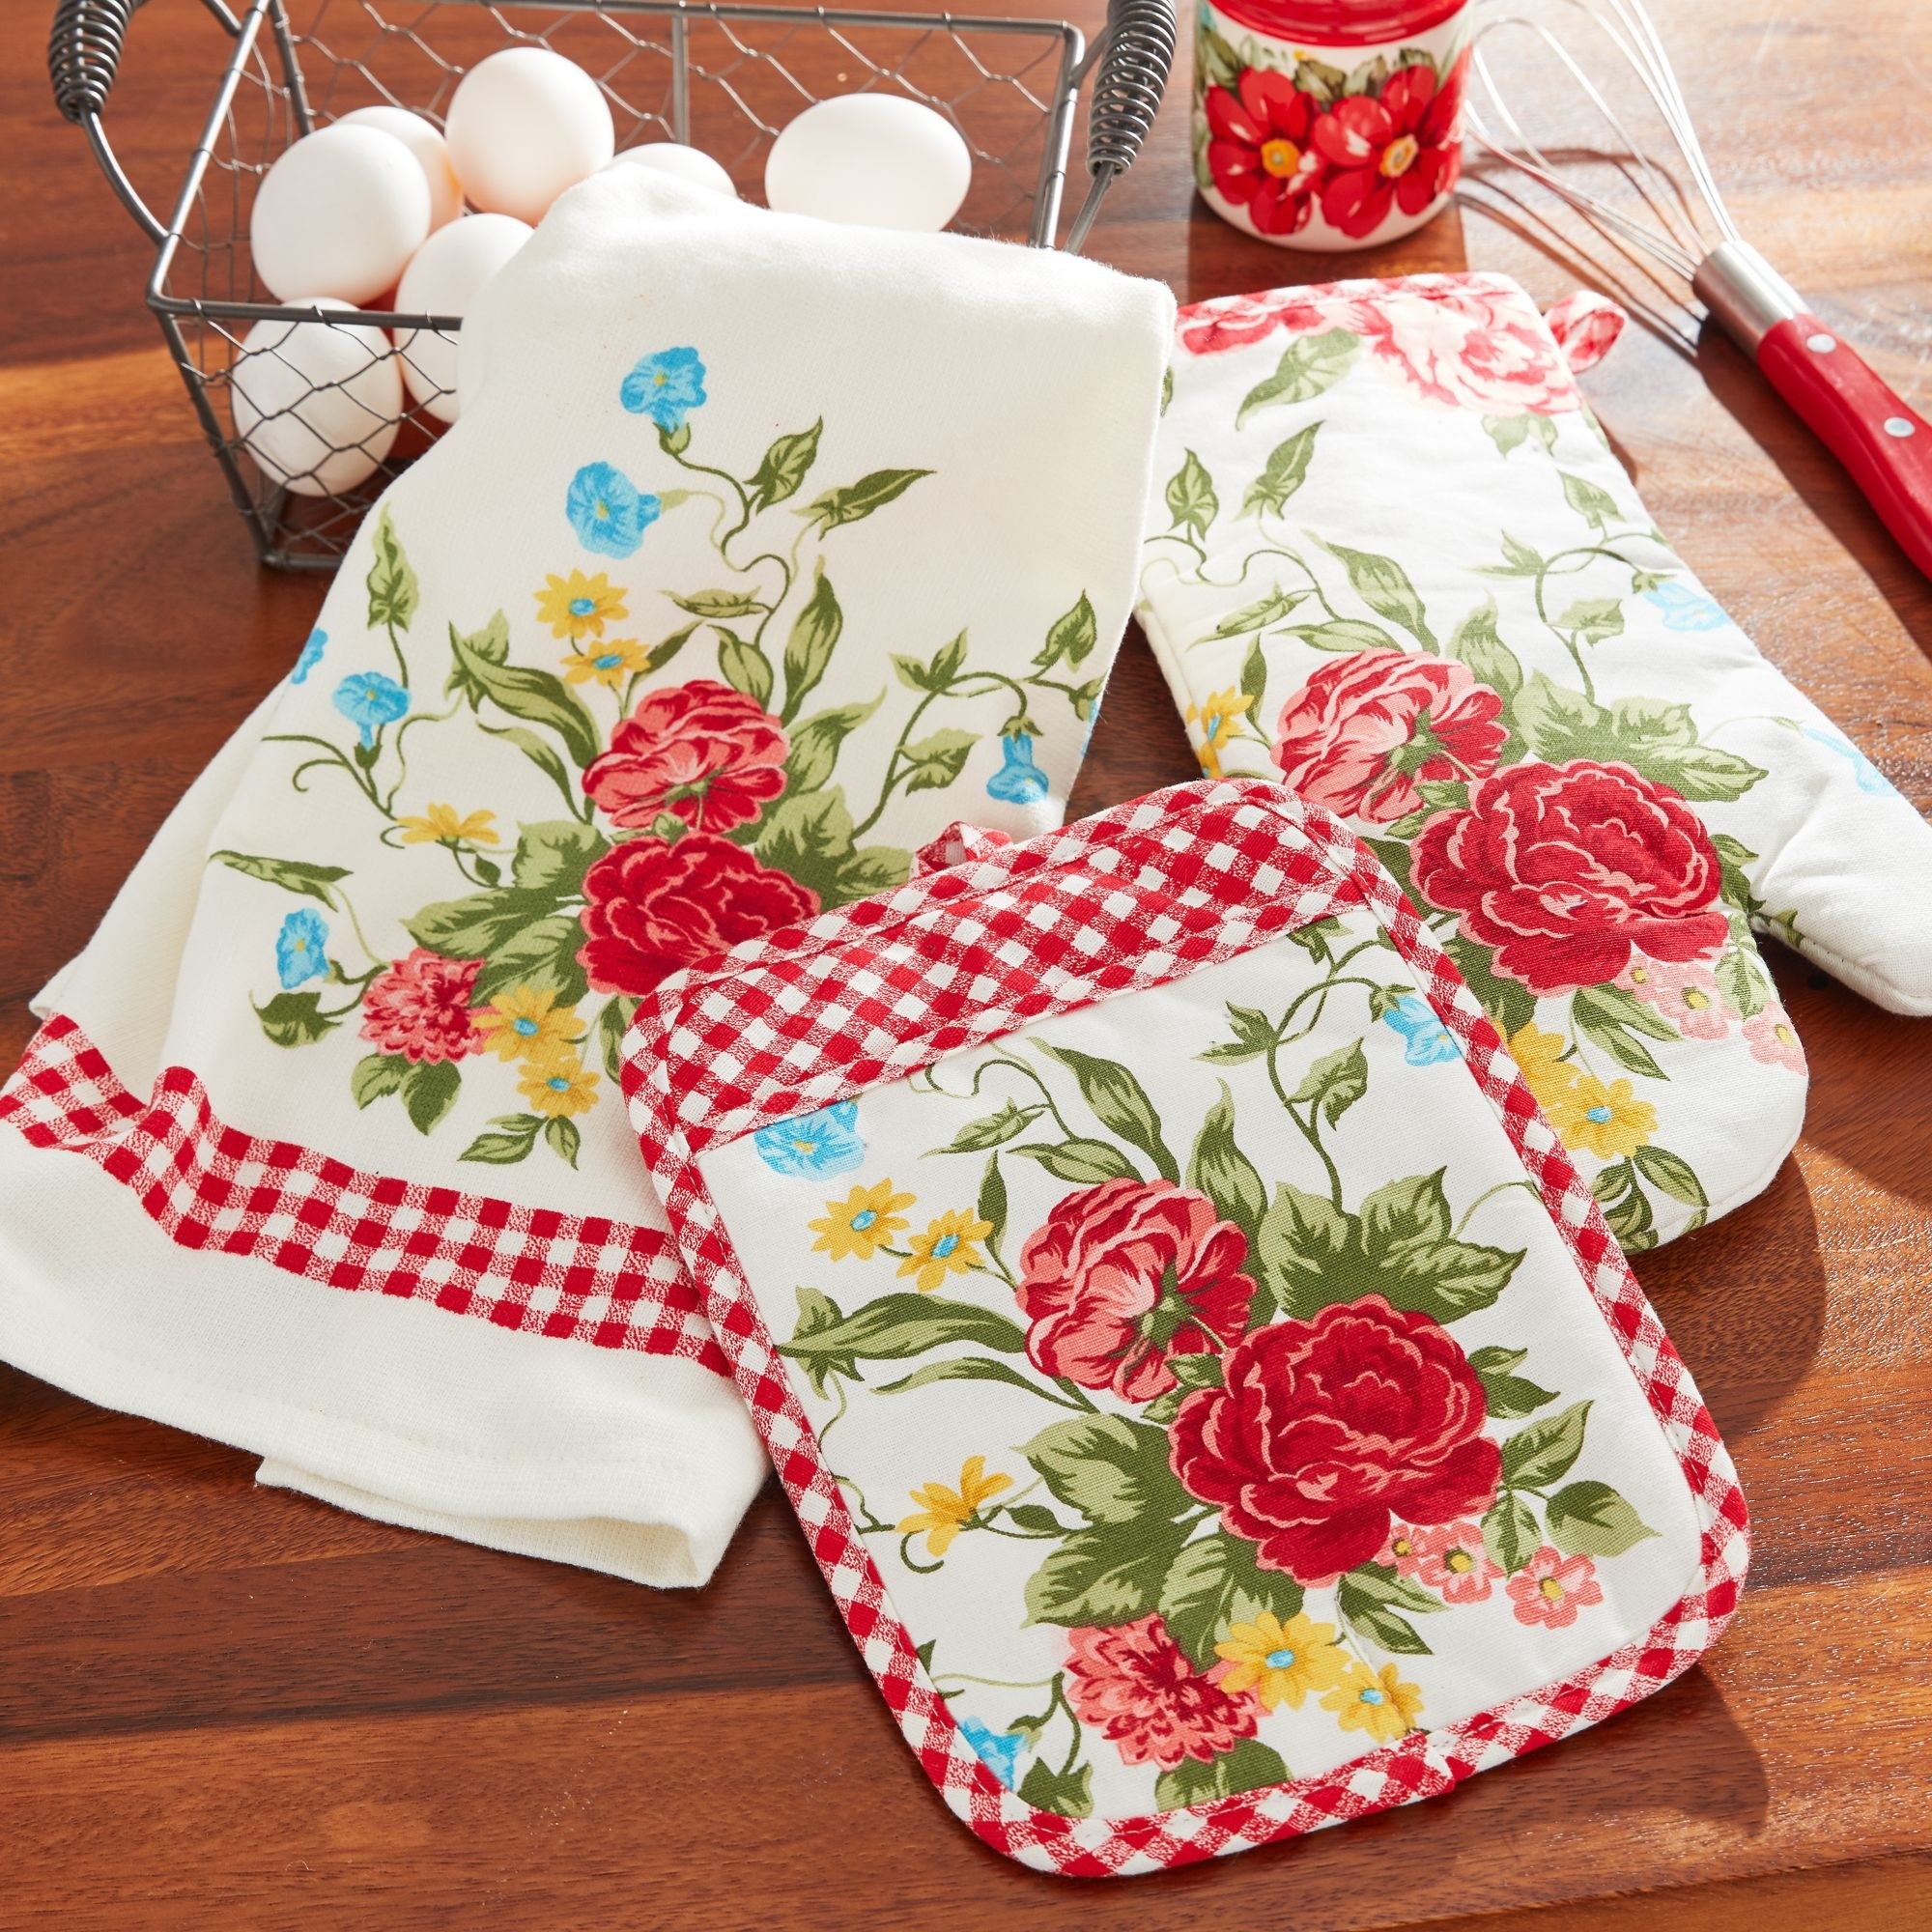 the floral pot holder, towel, and oven mitt